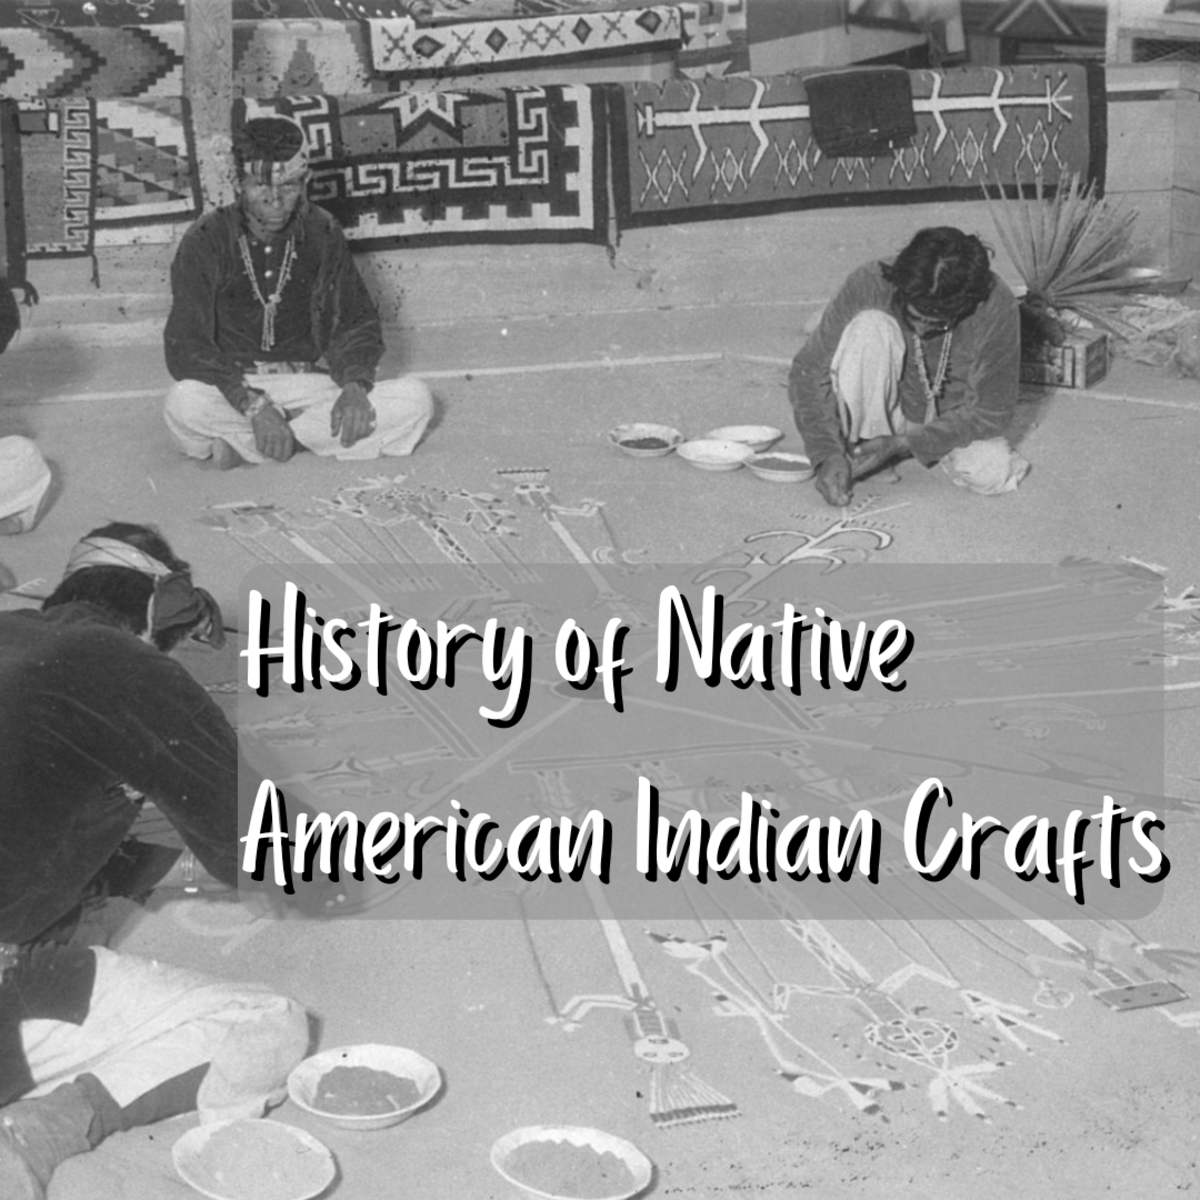 Read on to learn about the vibrant history of Native American art and crafts. The photo above depicts Native American (Navajo) men work on a sand painting probably in Arizona. Woven blankets and rugs are displayed nearby.